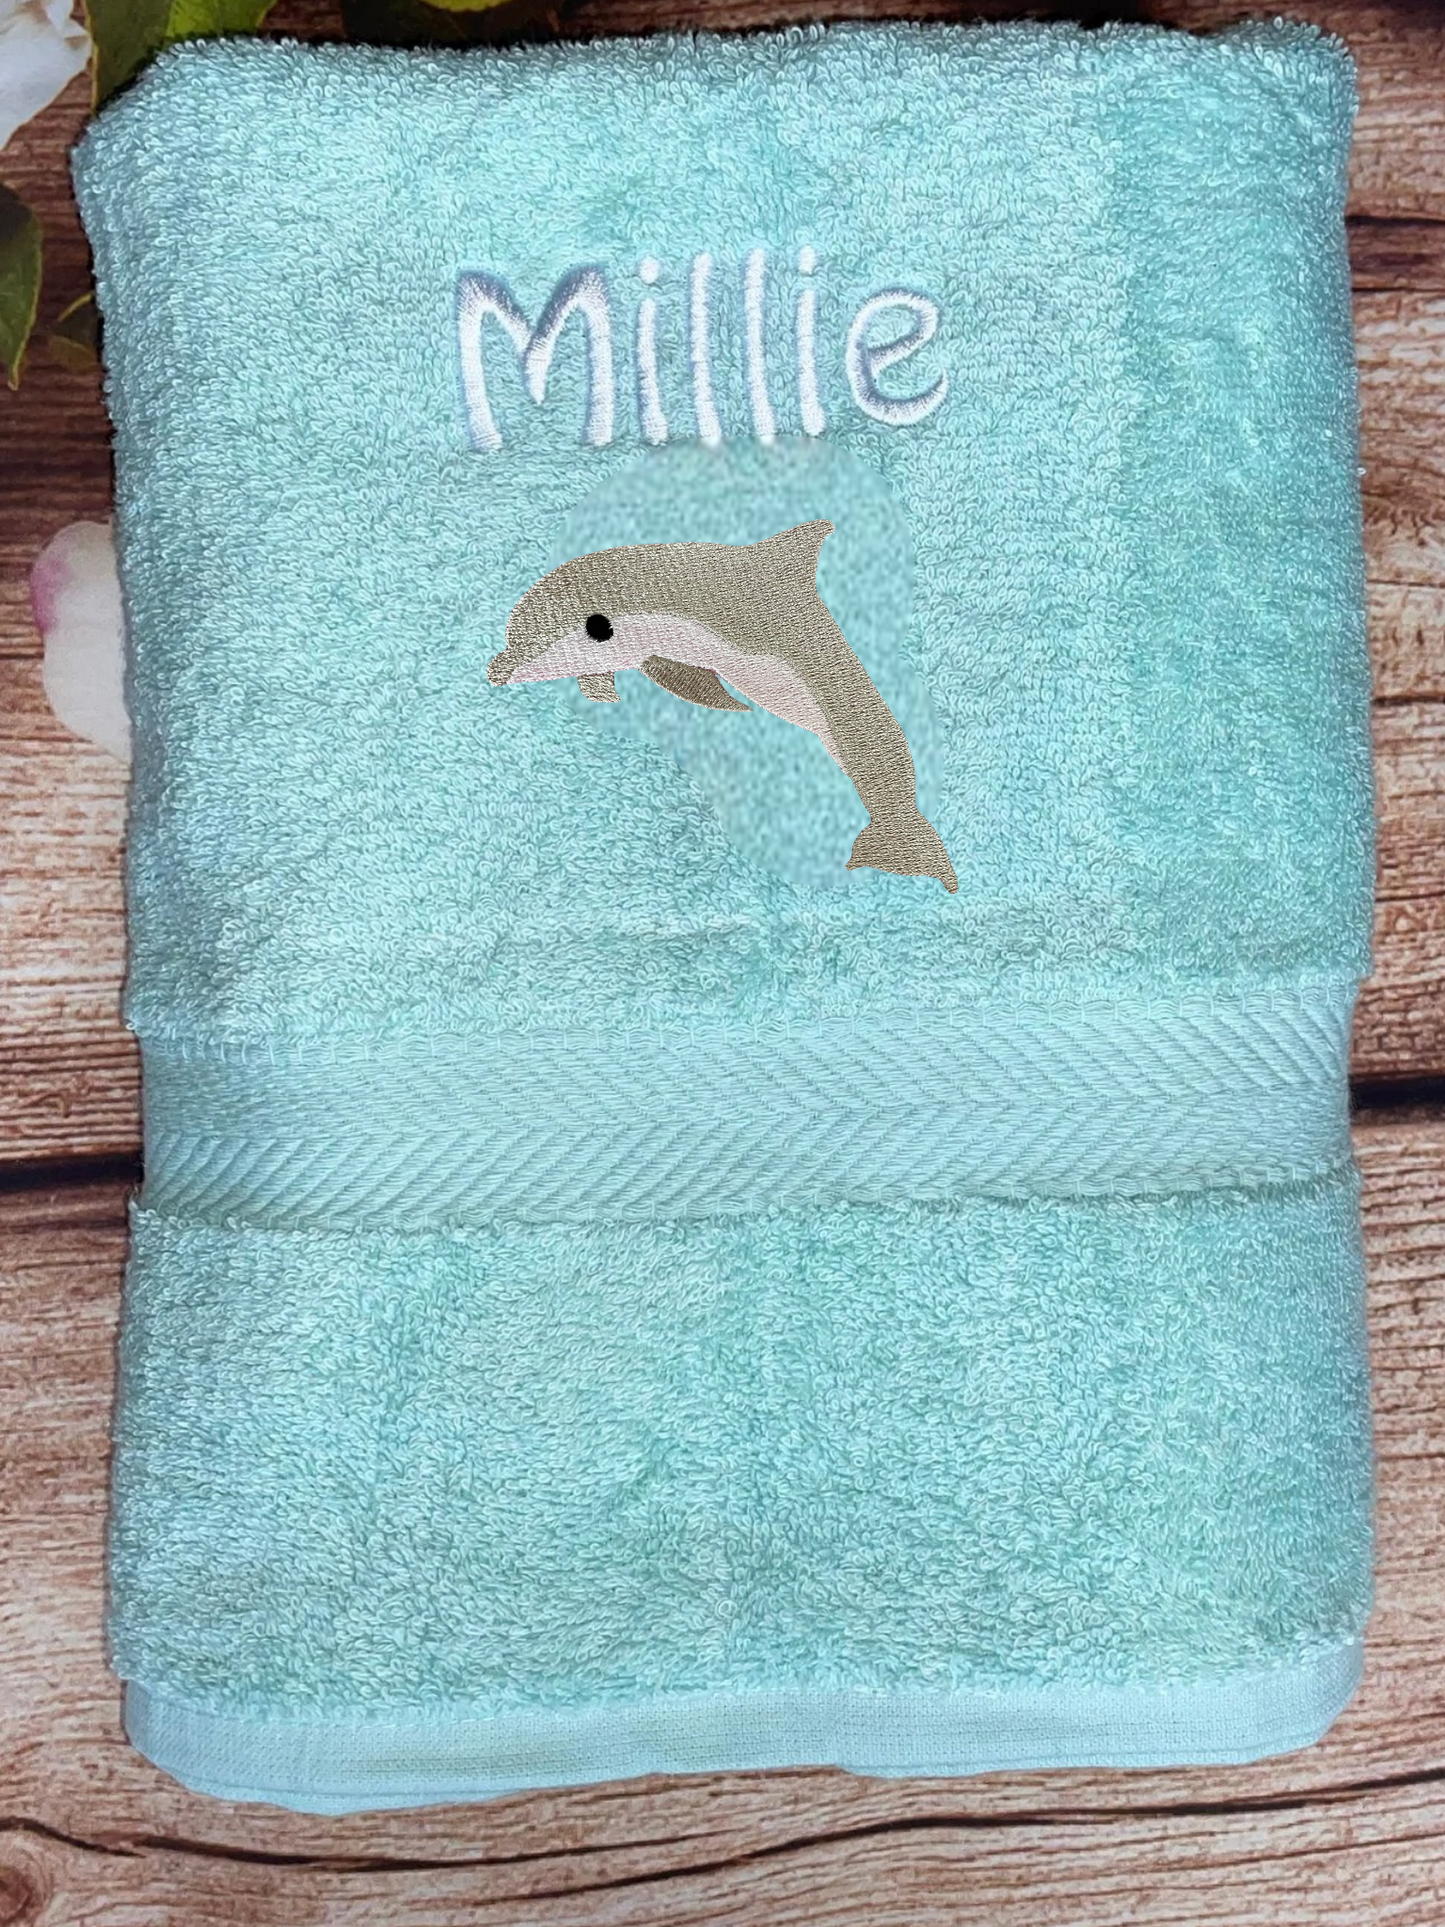 Embroidered Personalised Swimming, beach or Sports Towel. Ideal gift - Dolphin